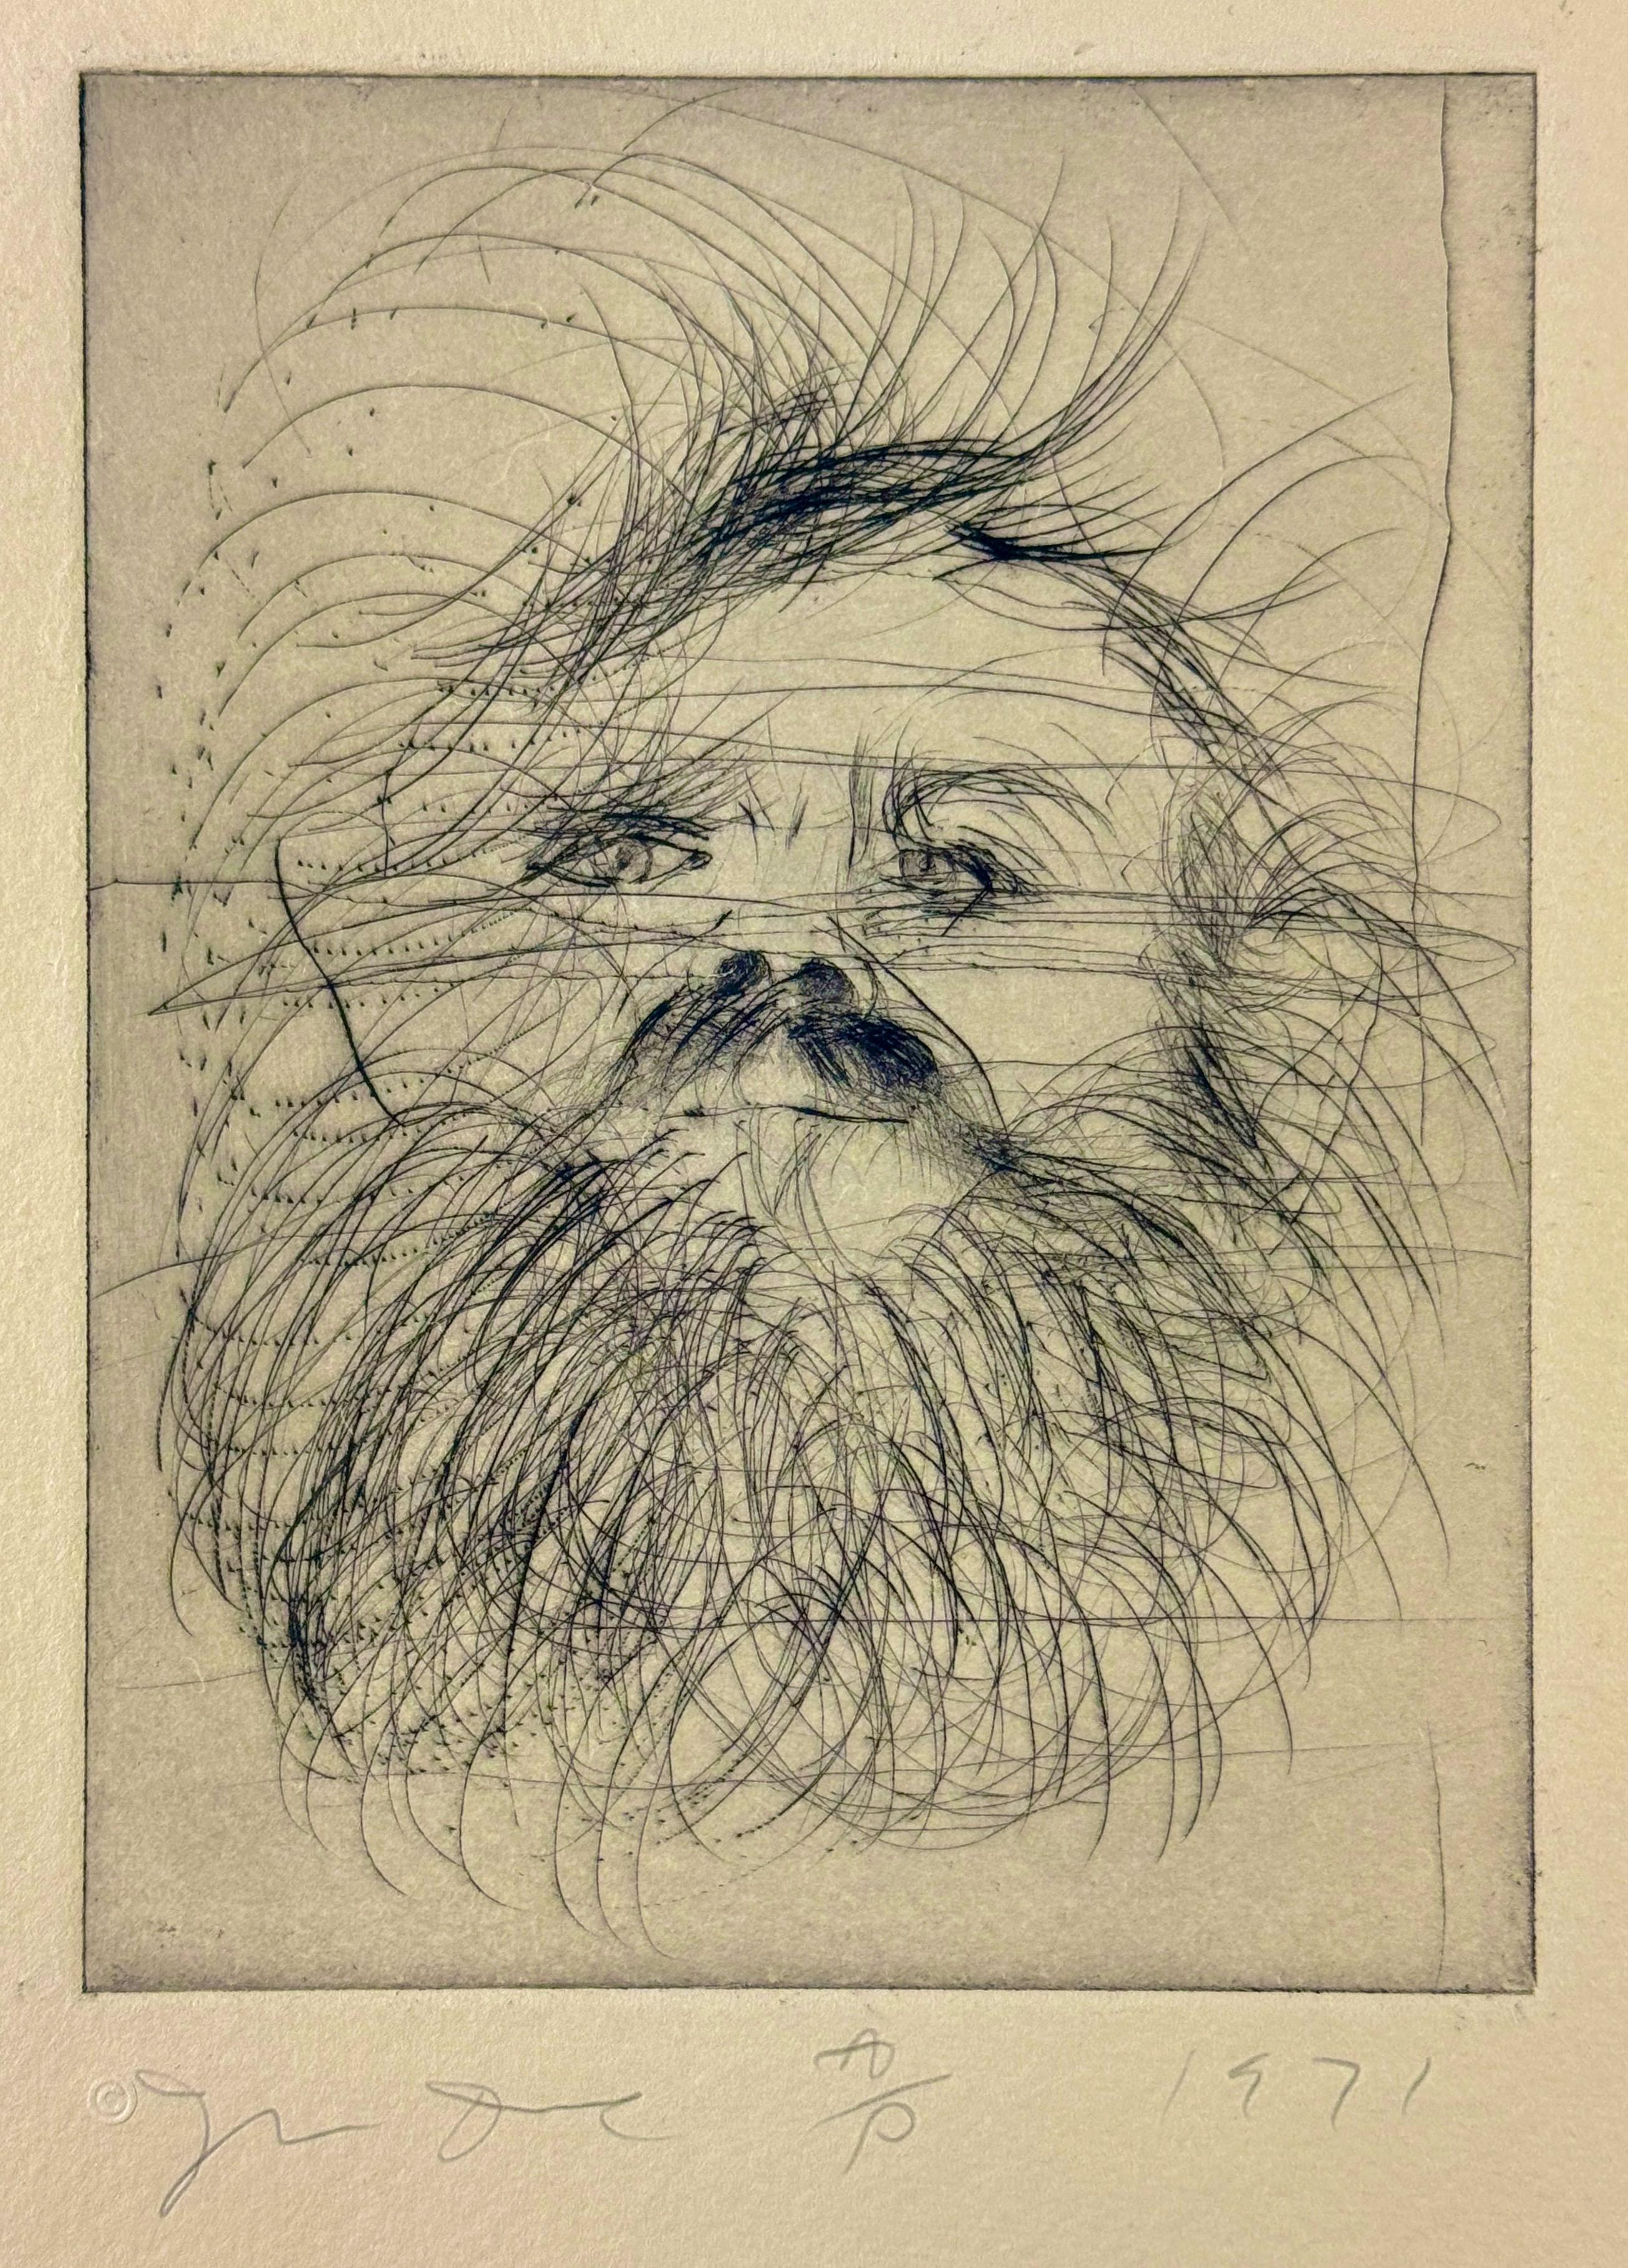 Jim Dine, Self Portrait 
drypoint on Hodgkinson Hand Made Tone-Weave paper
Paper 18 x 14 in. / 46 x 36 cm
Plate 8 x 6 in. / 20 x 15 cm
plate one from Self Portraits (1971) portfolio of nine drypoints. Edition 25 + 5 artist's proofs; this impression